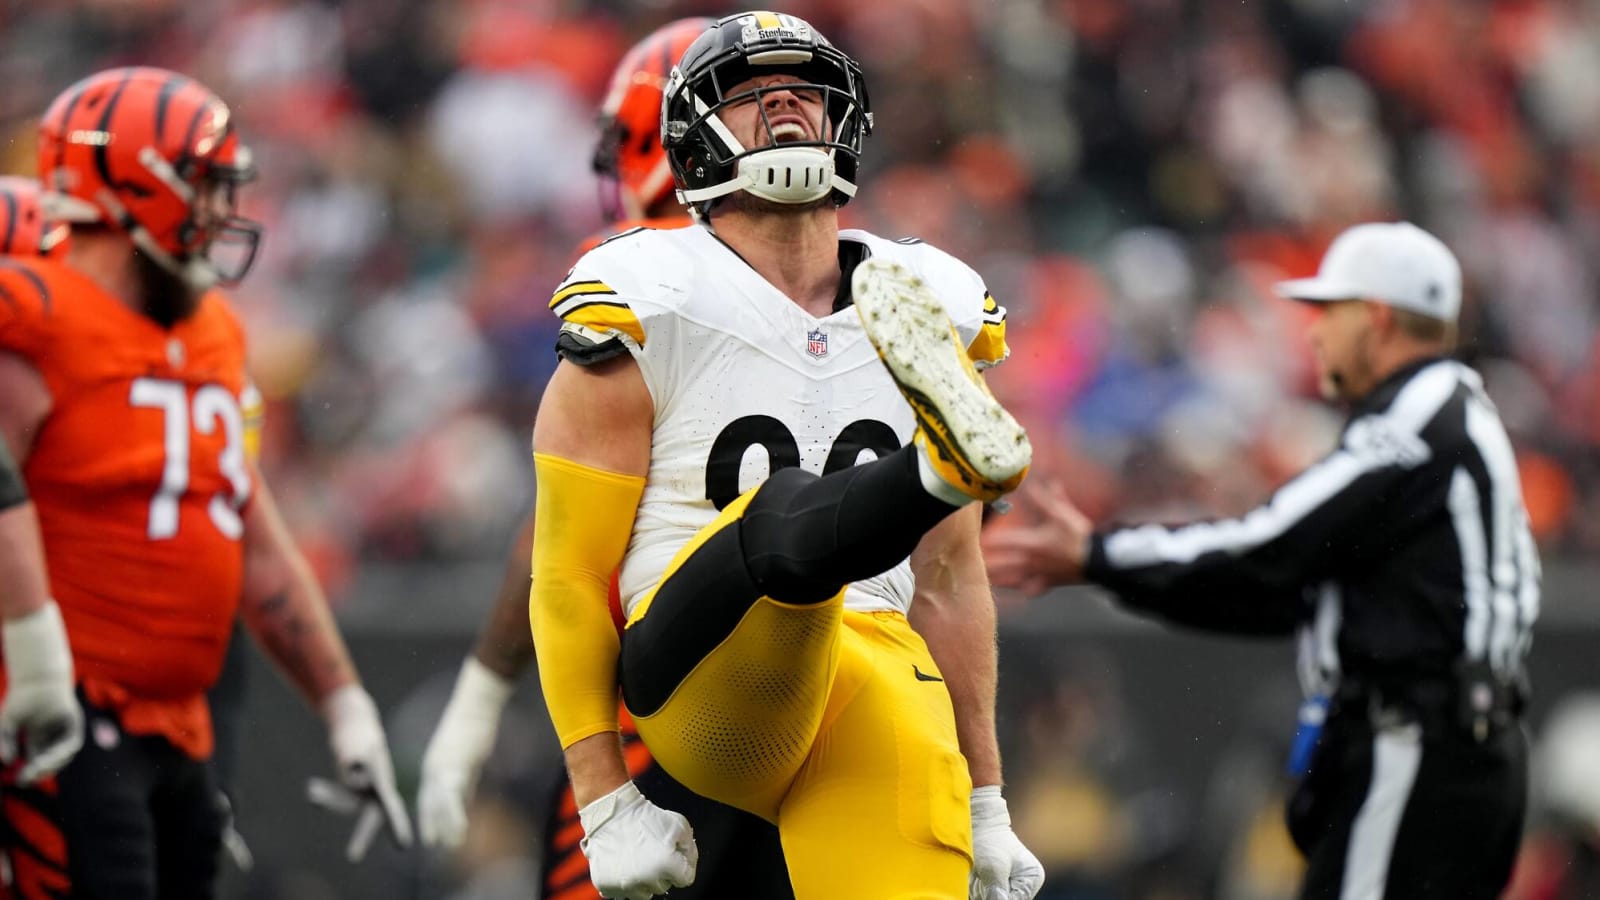 Plays of the Year: Watt scoops & scores, sets Steelers sack record vs Browns